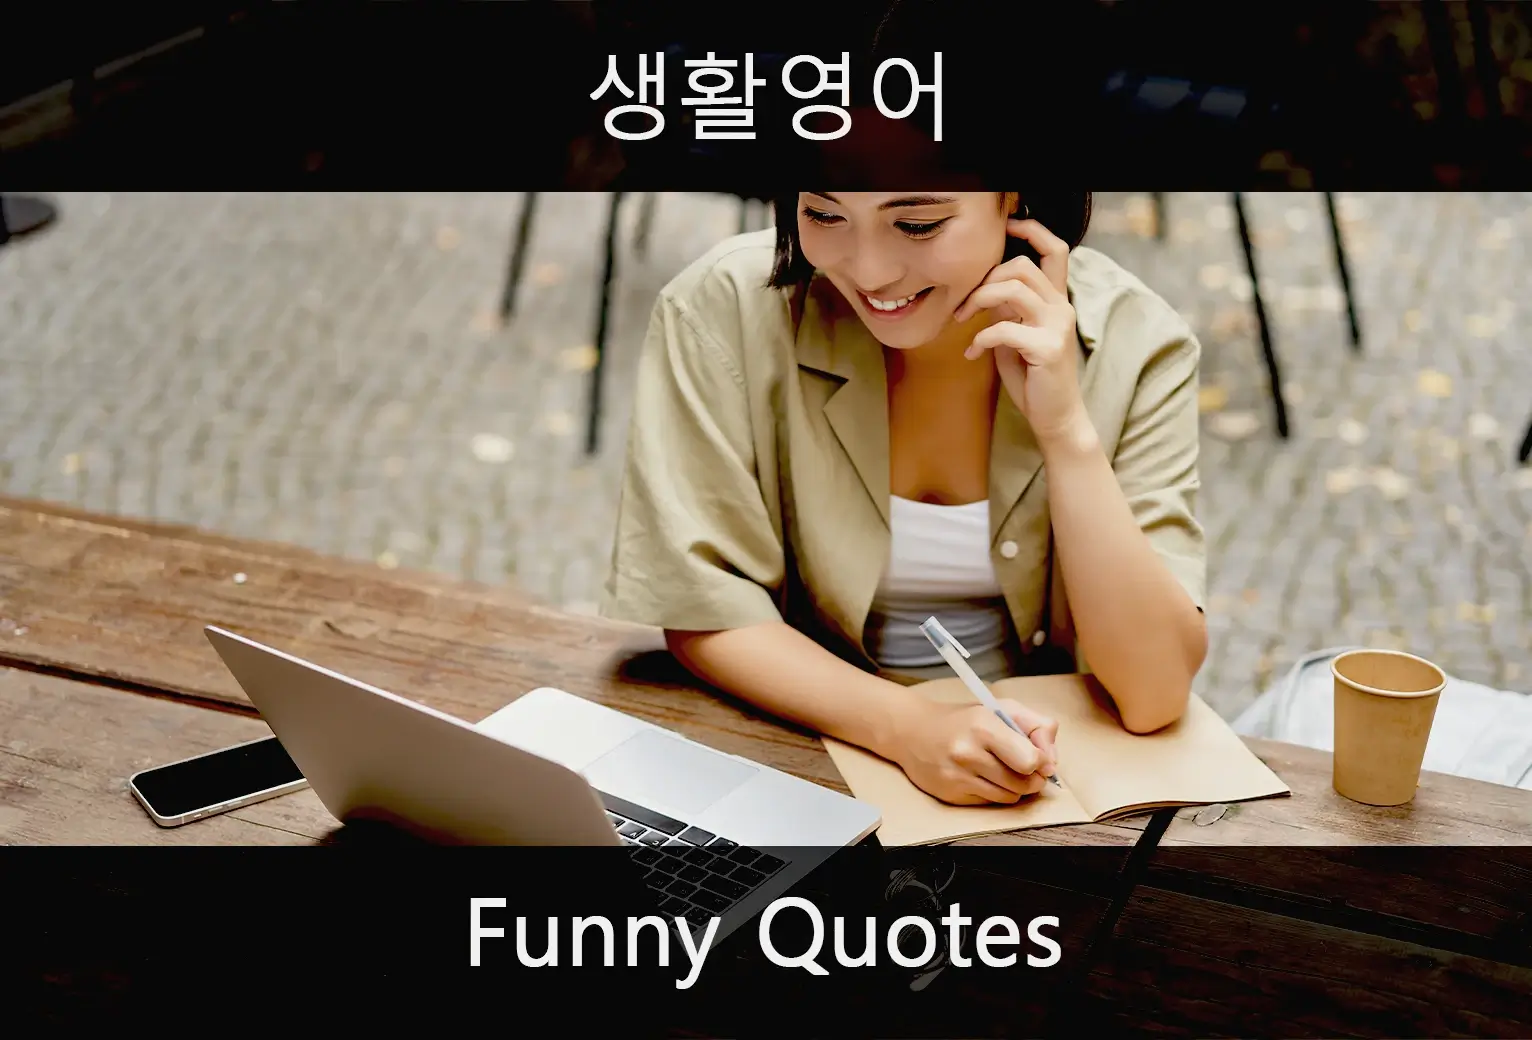 Funny Quotes.webp